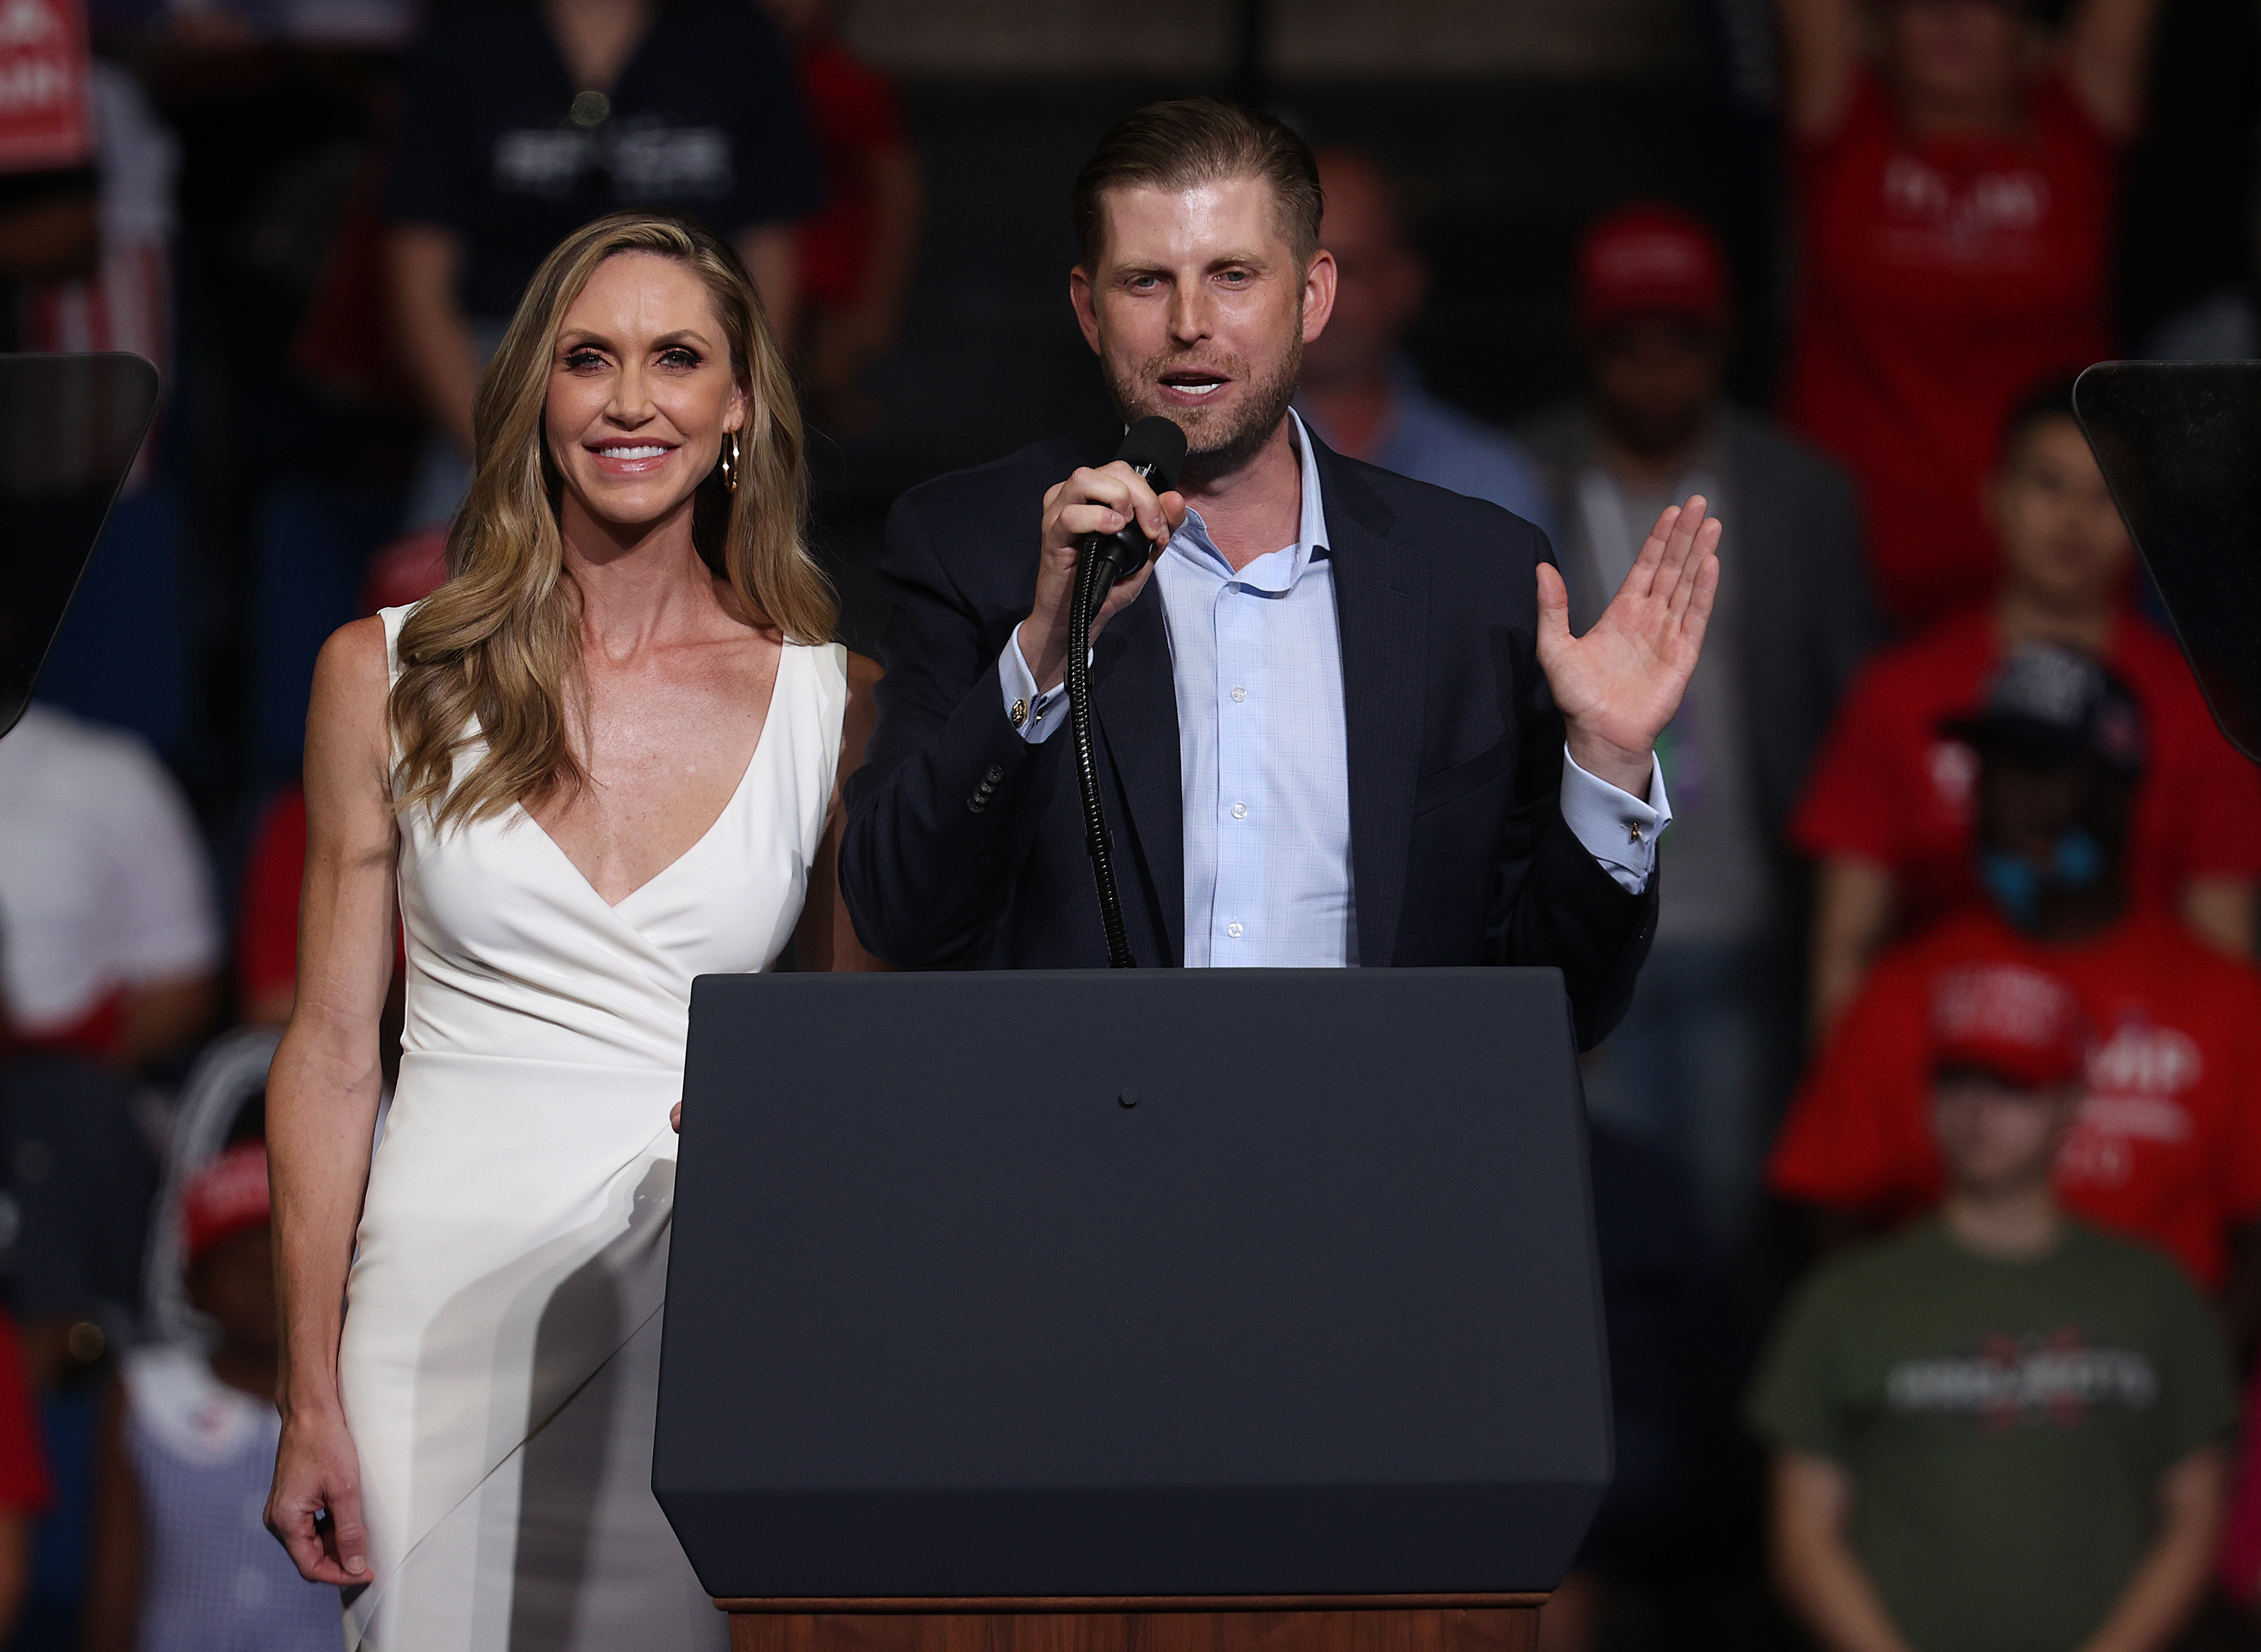 TULSA, OKLAHOMA - JUNE 20: Eric Trump and his wife Lara Trump address the crowd gathered at a campaign rally for U.S. President Donald Trump at the BOK Center, June 20, 2020 in Tulsa, Oklahoma. Trump is holding his first political rally since the start of the coronavirus pandemic at the BOK Center on Saturday while infection rates in the state of Oklahoma continue to rise. (Photo by Win McNamee/Getty Images)